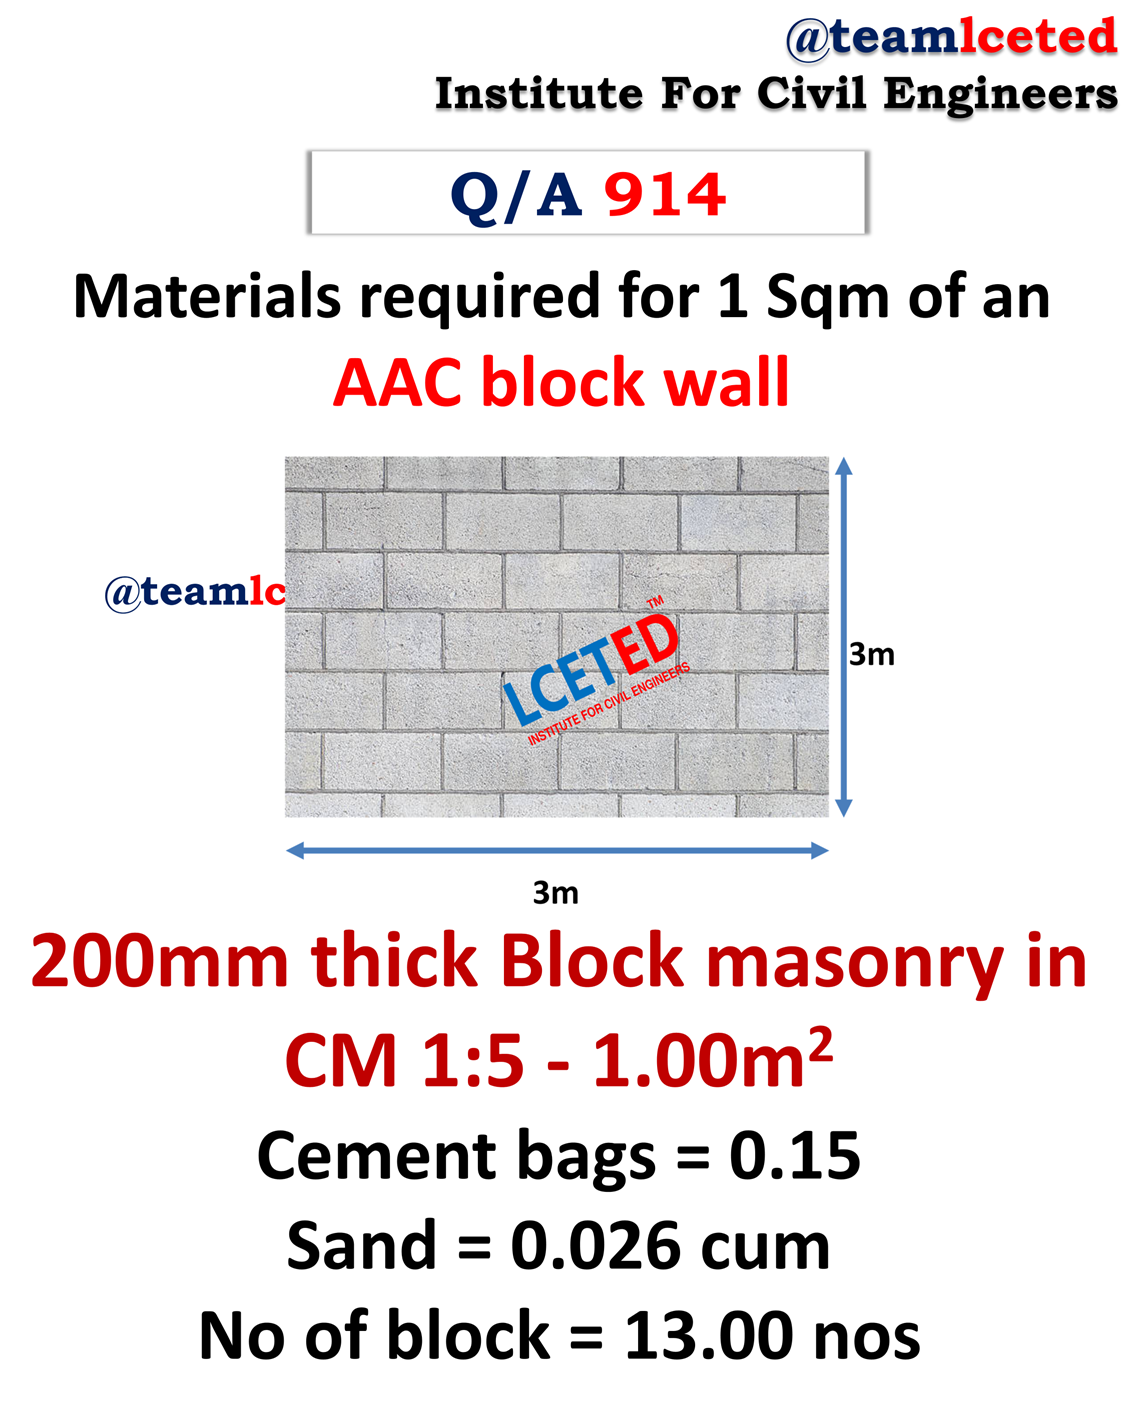 Materials required for 1 Sqm of an AAC block wall